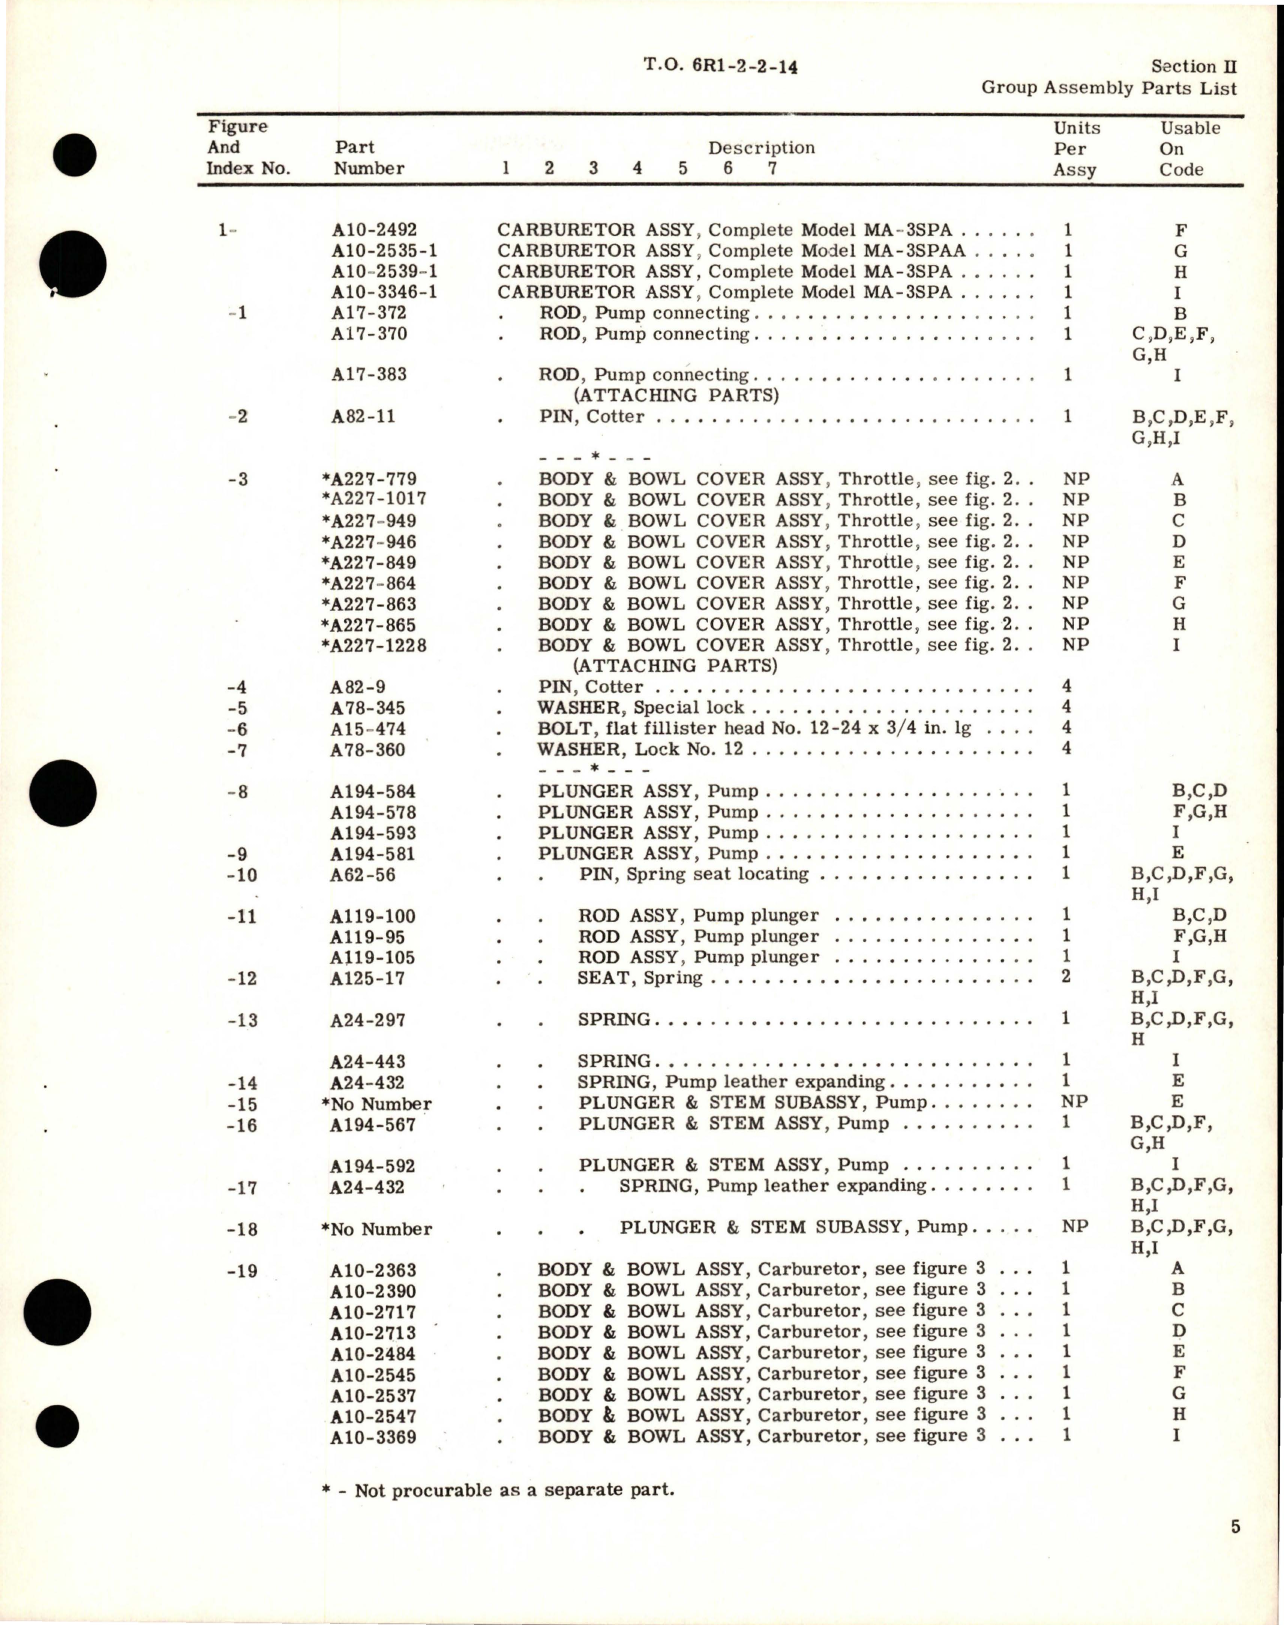 Sample page 7 from AirCorps Library document: Illustrated Parts Breakdown for Aircraft Carburetor